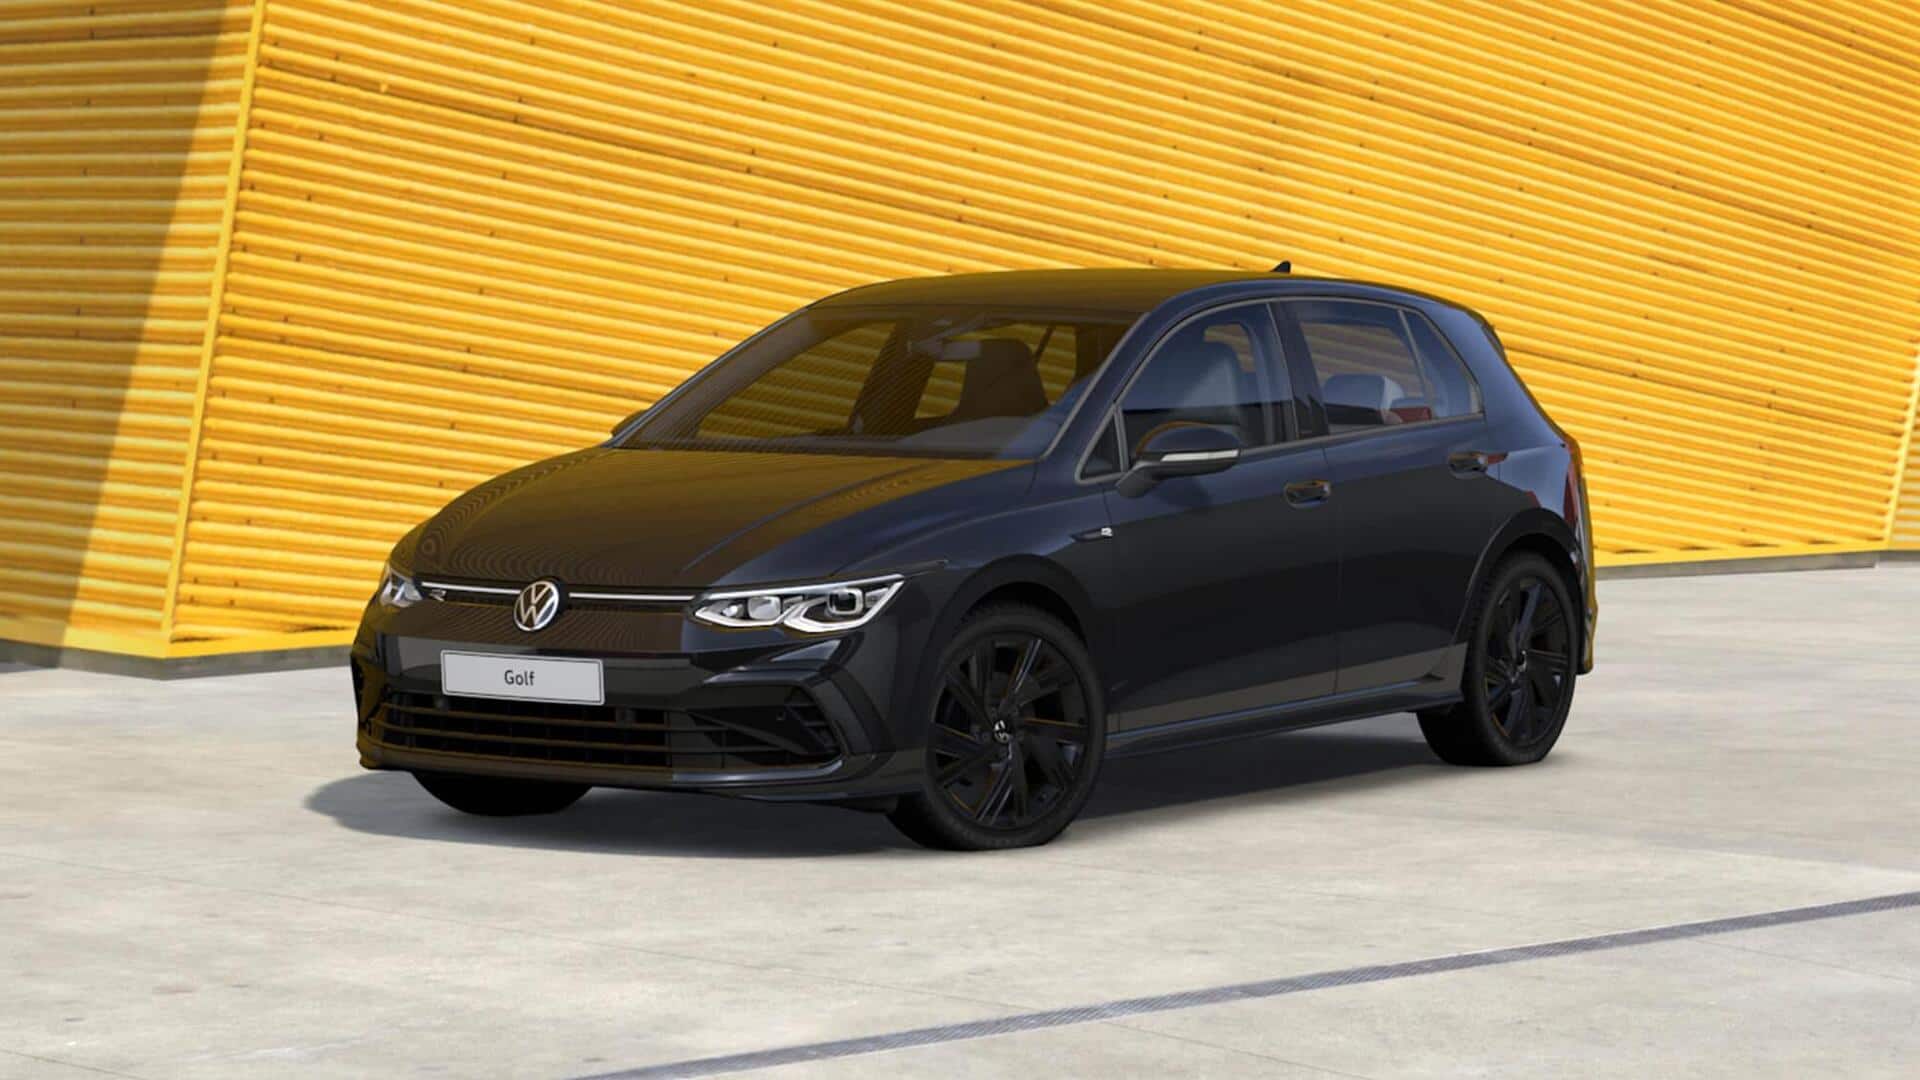 Volkswagen's Golf Black Edition goes official: Check price, features